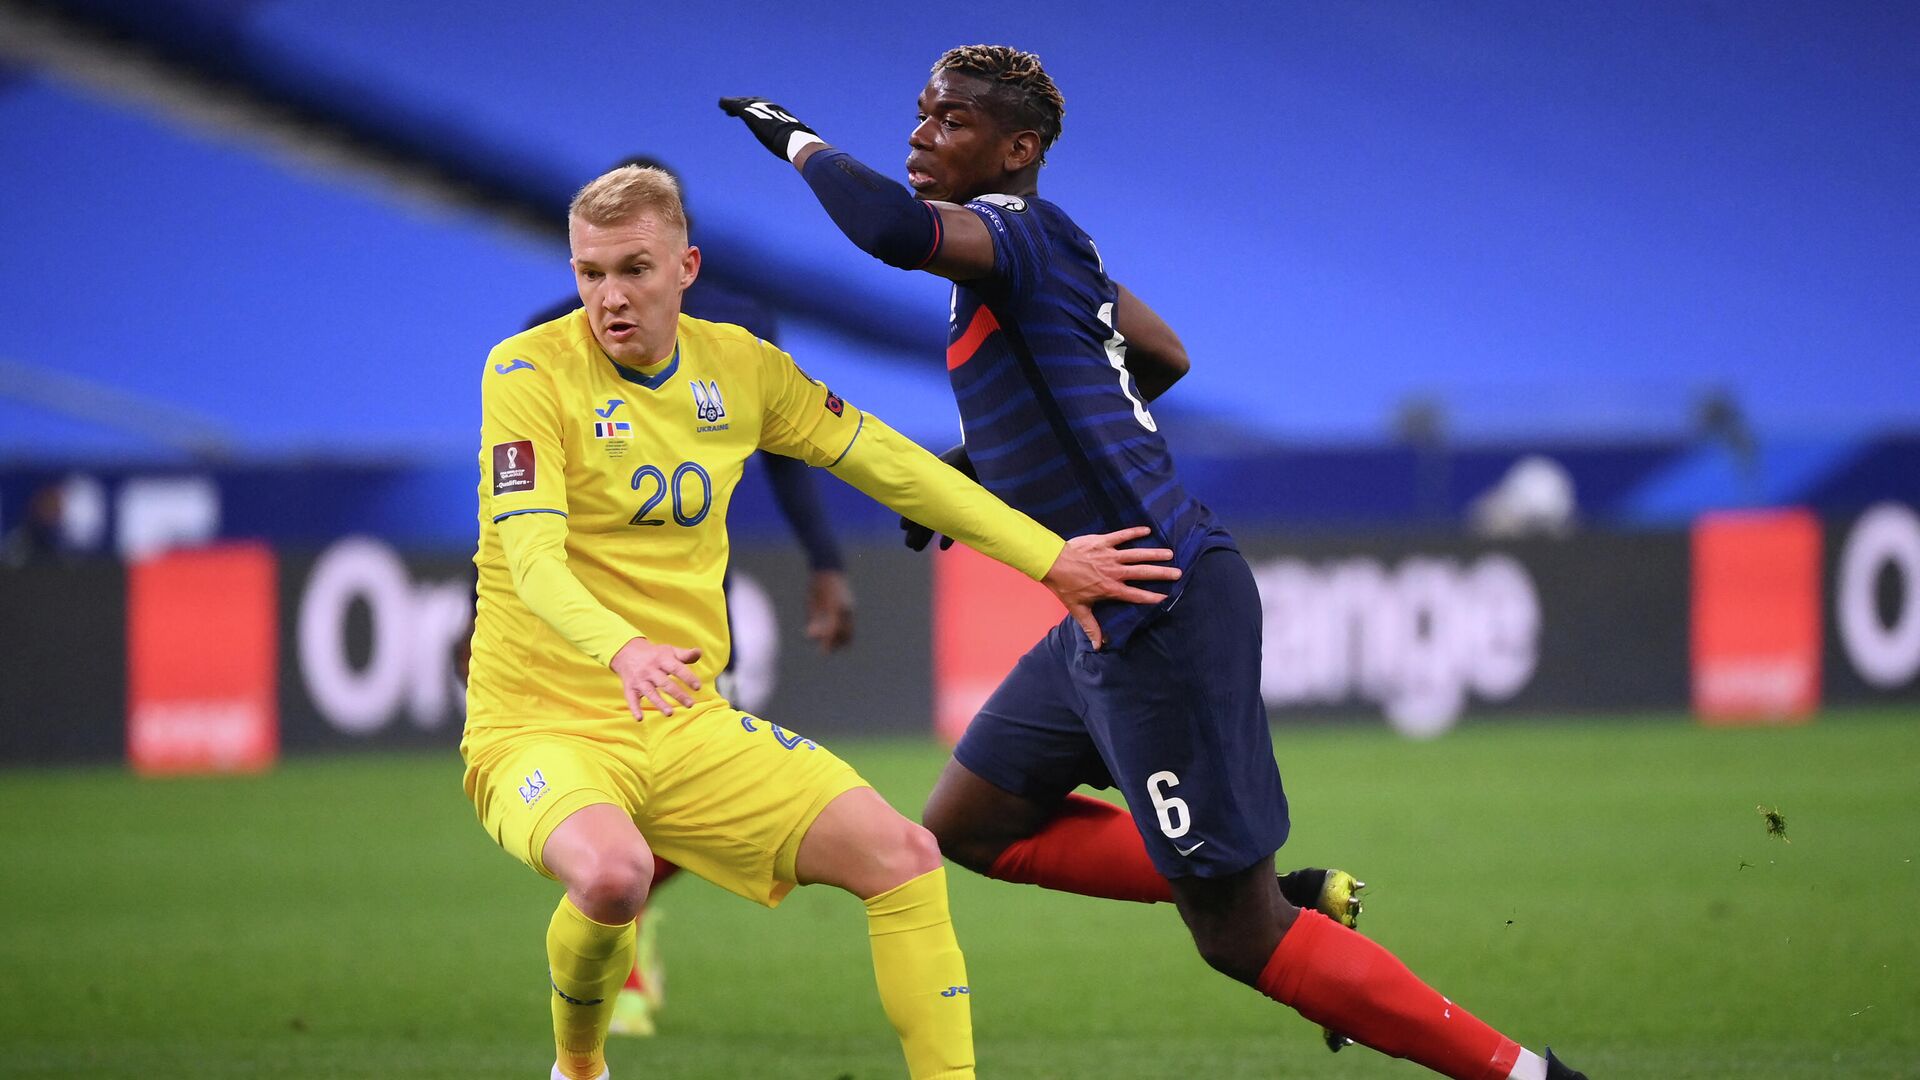 Ukraine's forward Viktor Kovalenko (L) vies with France's midfielder Paul Pogba during the FIFA World Cup Qatar 2022 qualification football match between France and Ukraine at the Stade de France in Saint-Denis, outside Paris, on March 24, 2021. (Photo by FRANCK FIFE / AFP) - РИА Новости, 1920, 25.03.2021